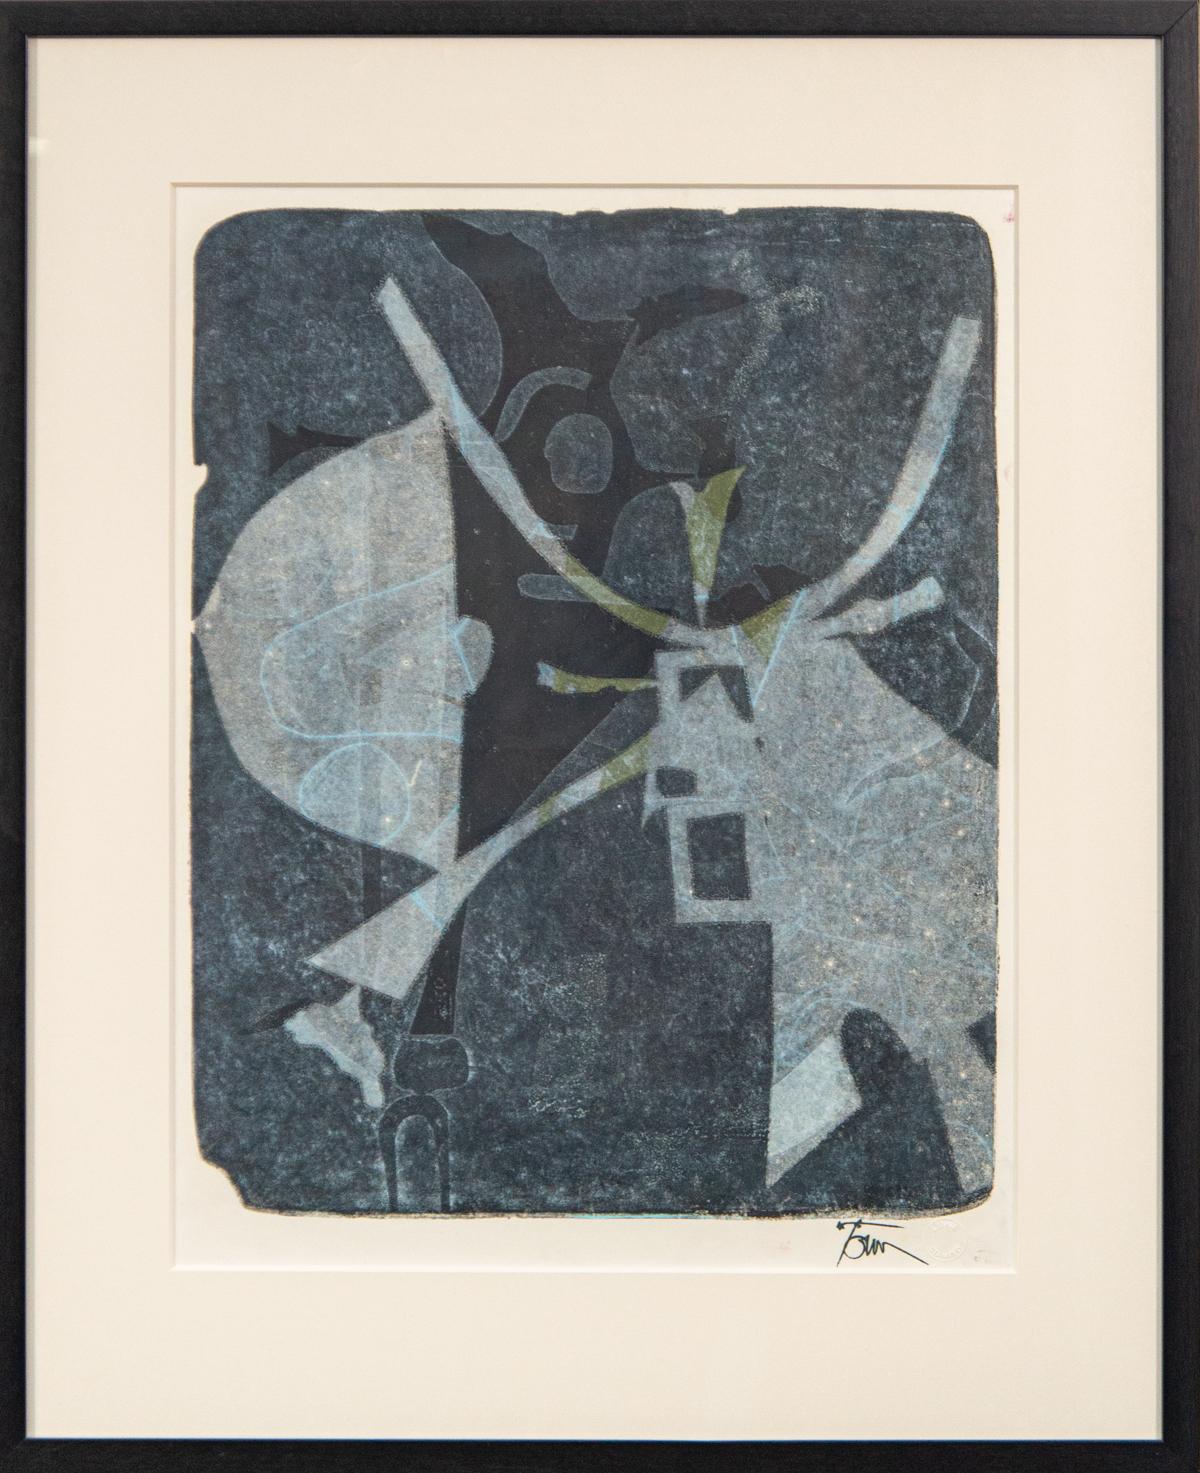 Harold Town Abstract Print - Untitled, 'Single Autographic Print' (1950s) - abstract, framed, monoprint